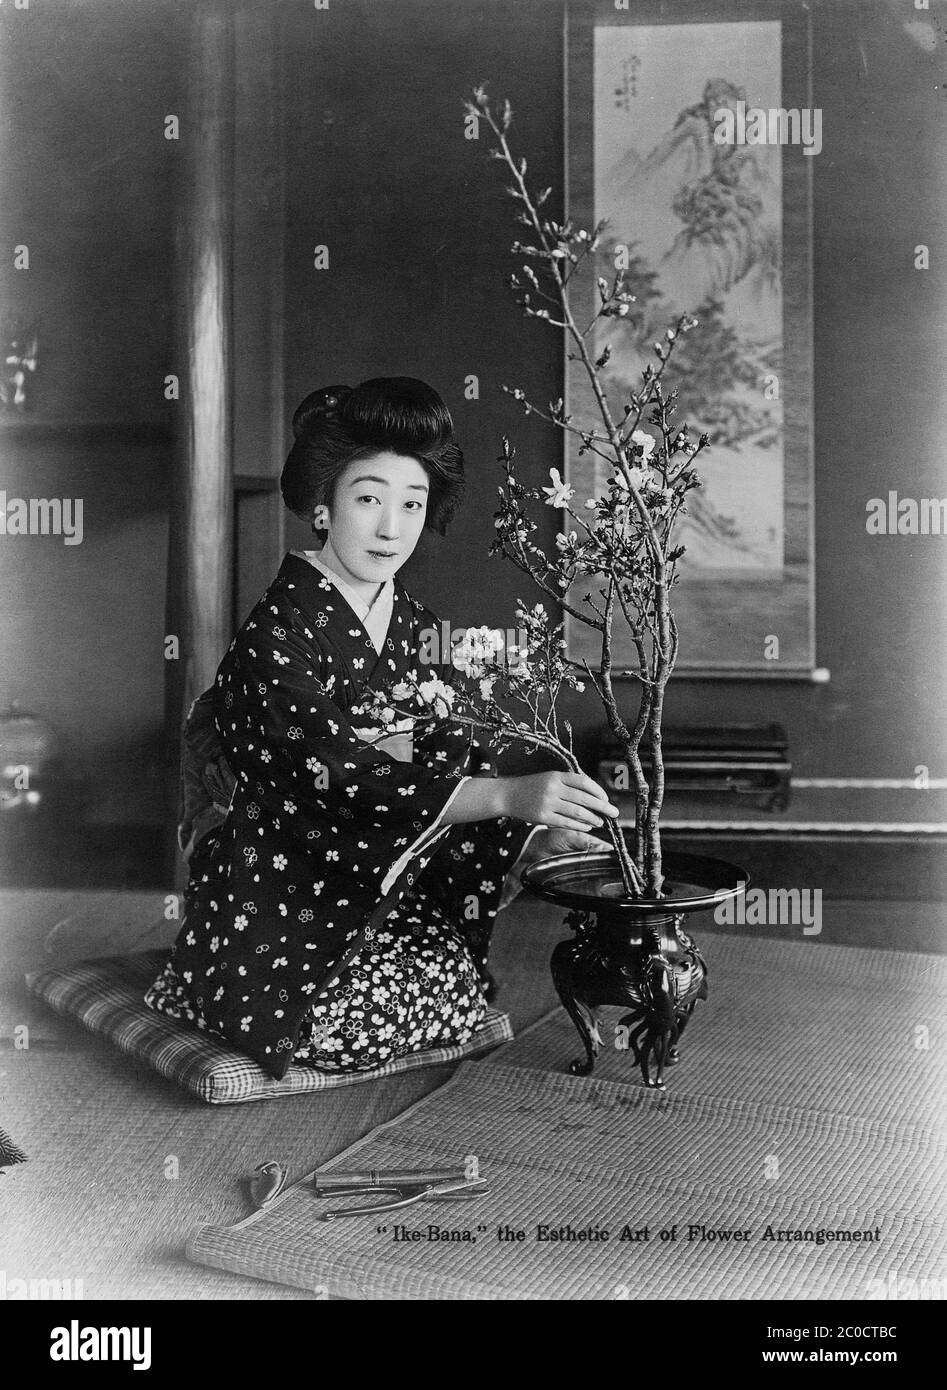 [ 1930s Japan - Japanese Flower Arrangement ] — Japanese woman in kimono with traditional hairstyle doing ikebana, Japanese style flower arrangement. Early 1930s.  During the Meiji and Taisho periods, ikebana and chado (tea ceremony) were a popular way to culturally enlighten oneself, especially for young women on the threshold of marriage.  20th century vintage postcard. Stock Photo